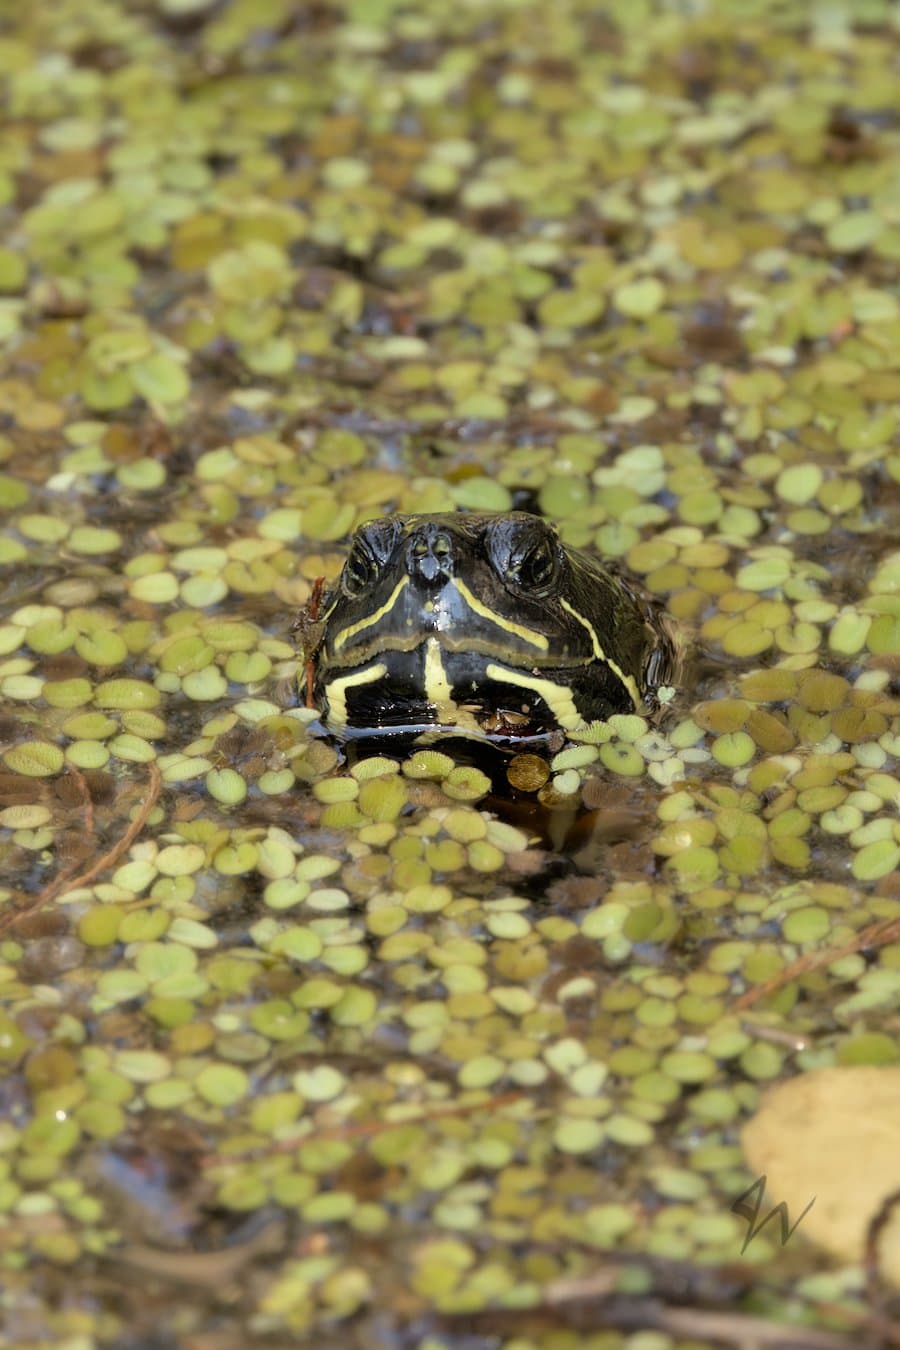 Florida Red-bellied cooter peeking its head above Giant Duckweed covered water.